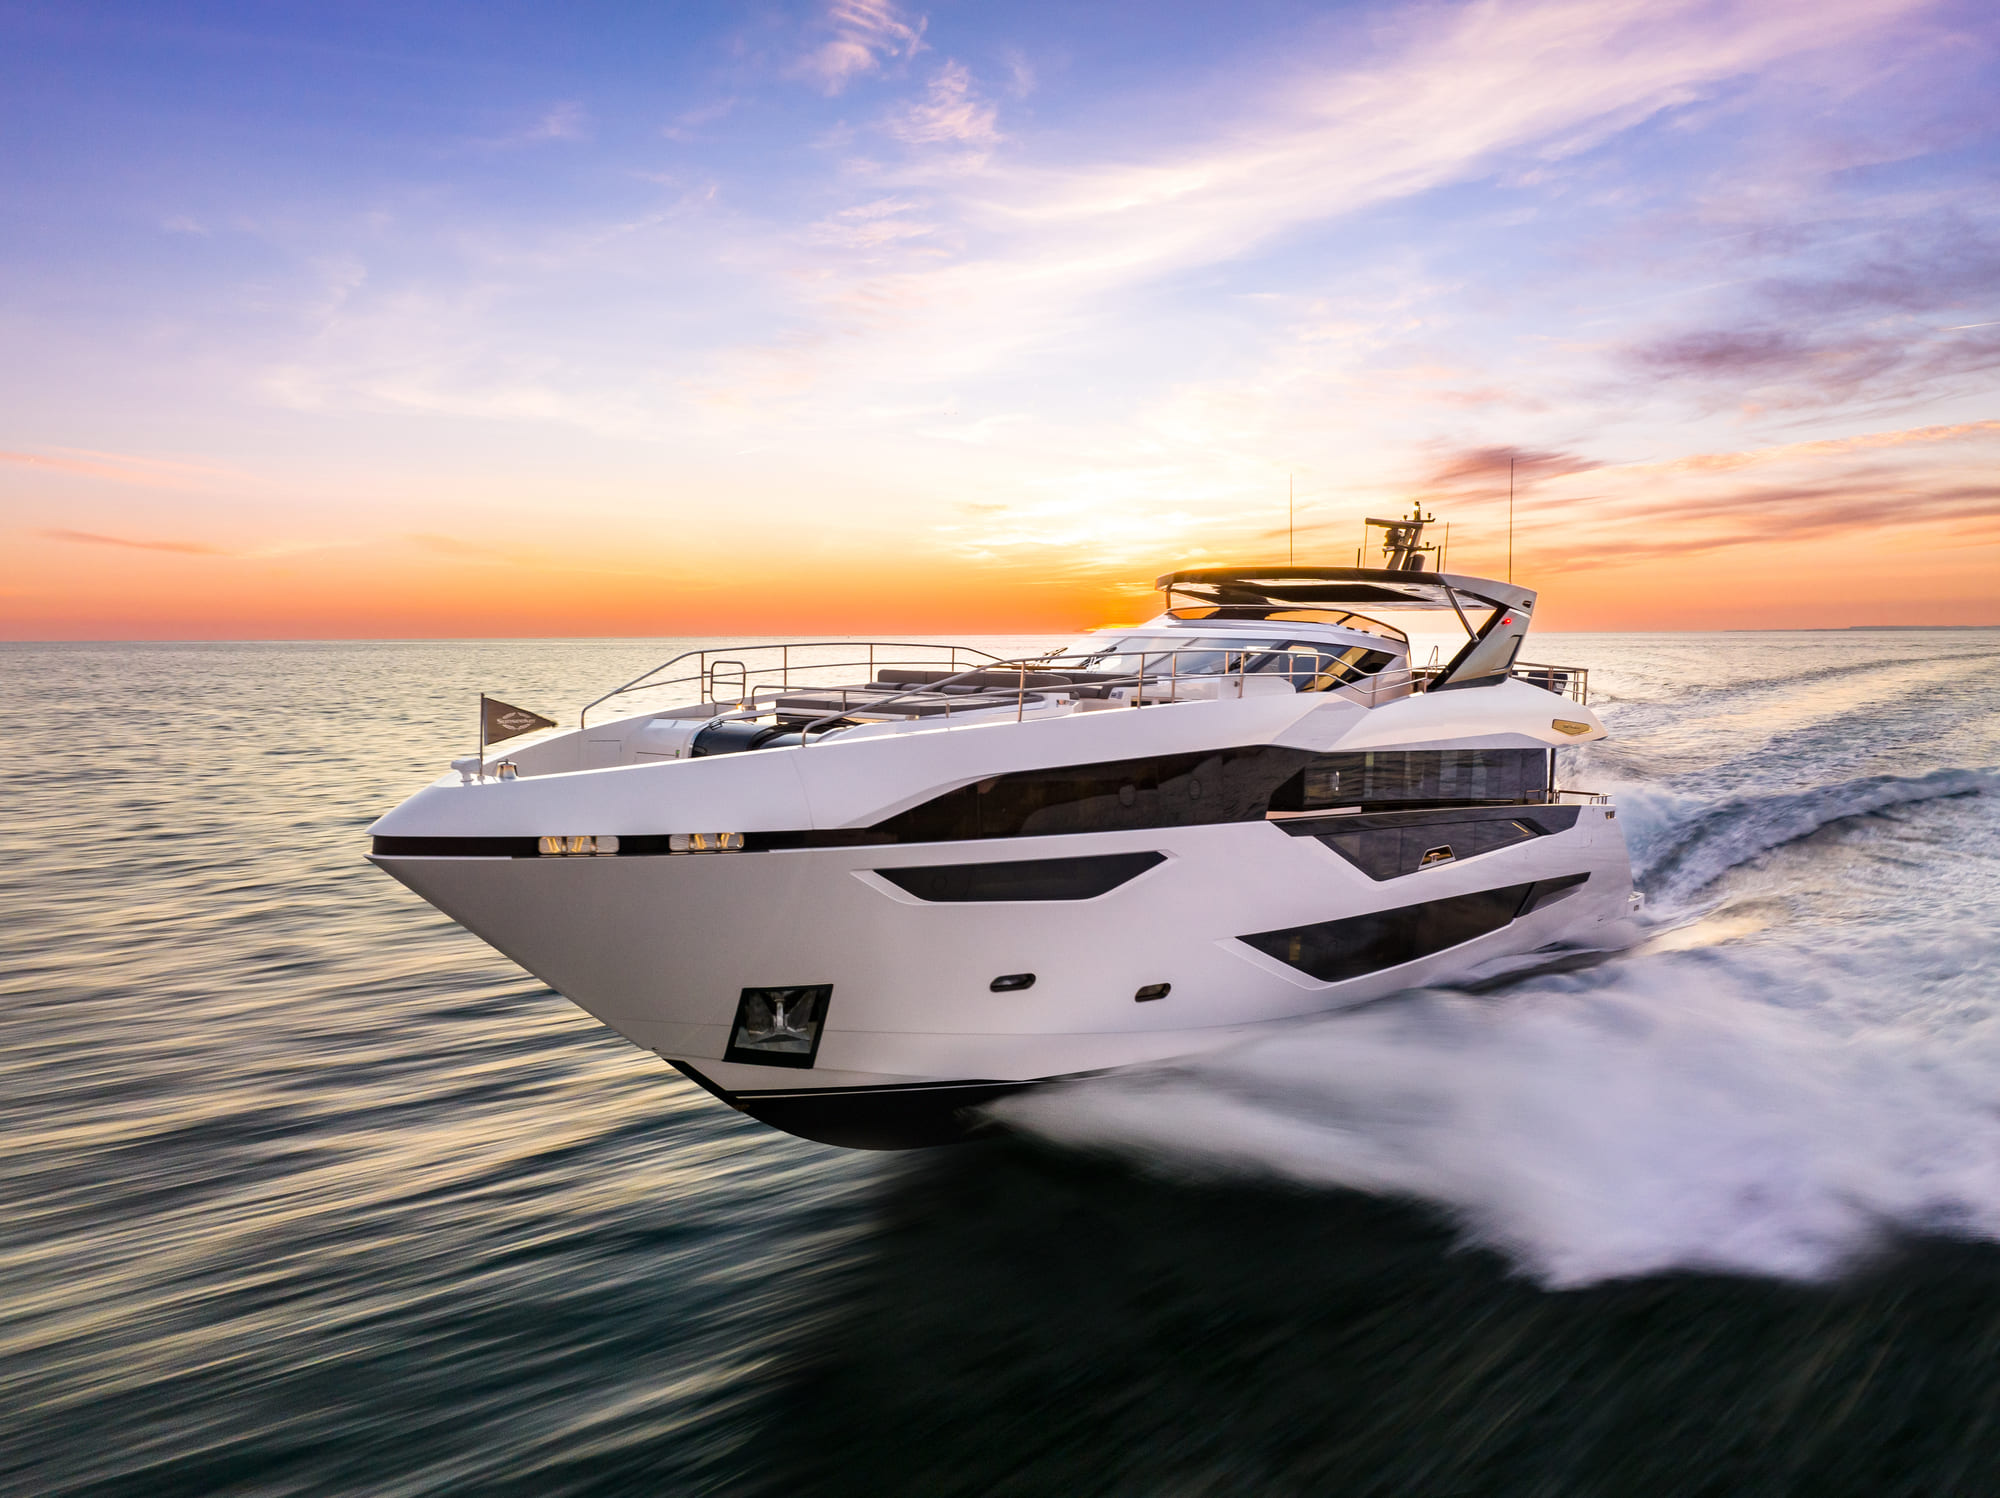 Sunseeker International: Expands Reach In Asia With Appointment Of New Distributor In Singapore